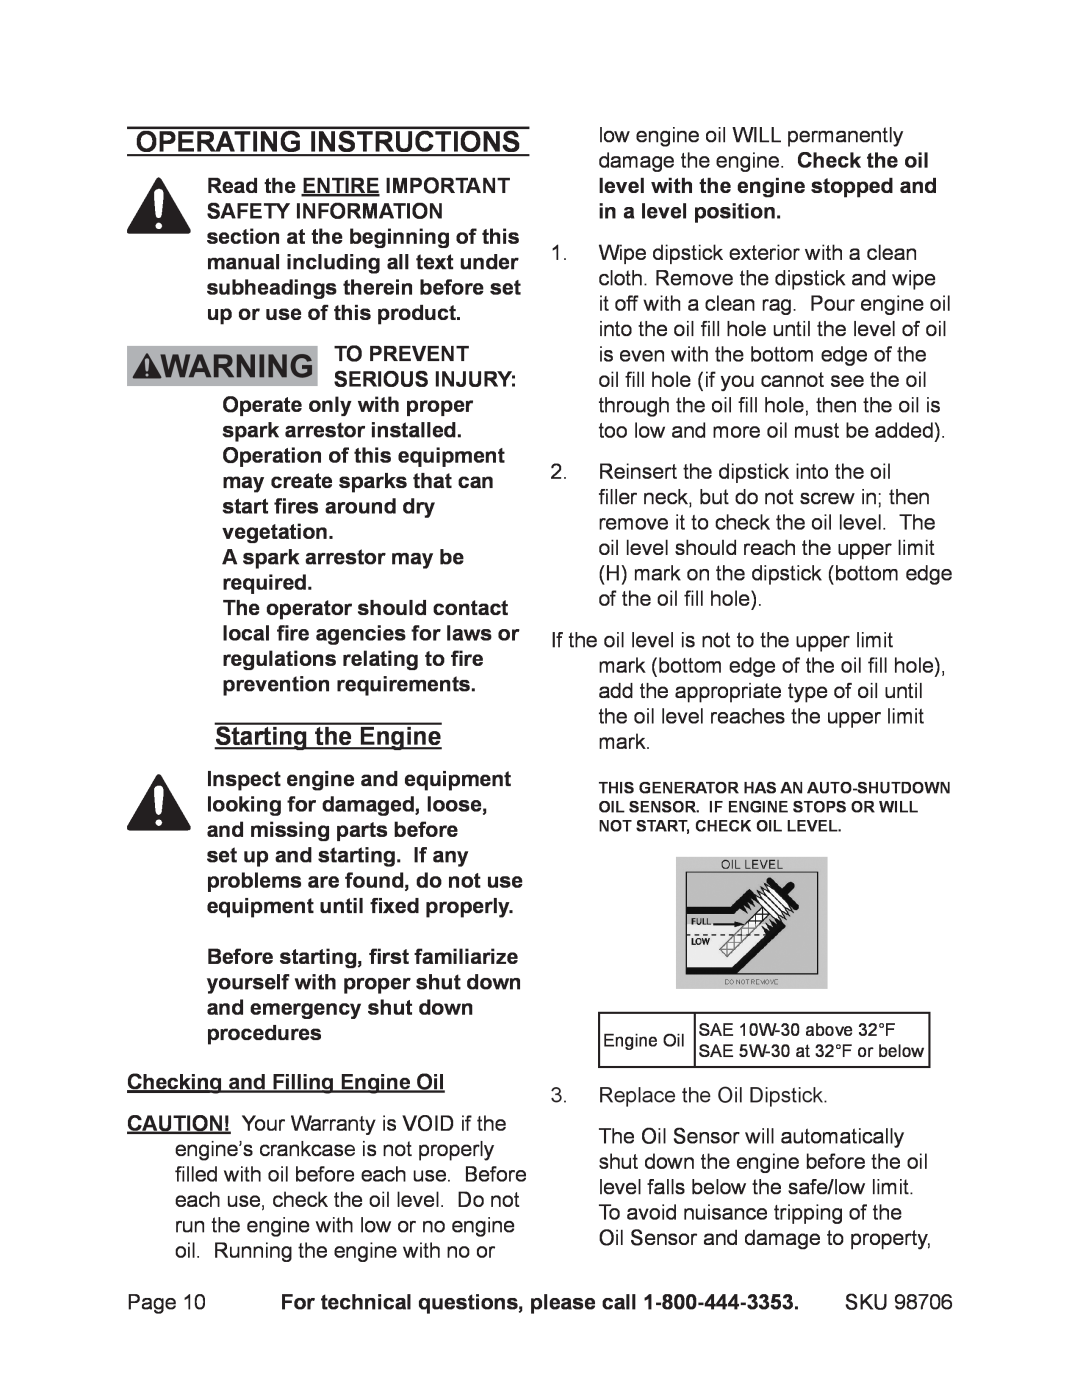 Chicago Electric 98706 manual Operating Instructions, To prevent serious injury, A spark arrestor may be required 